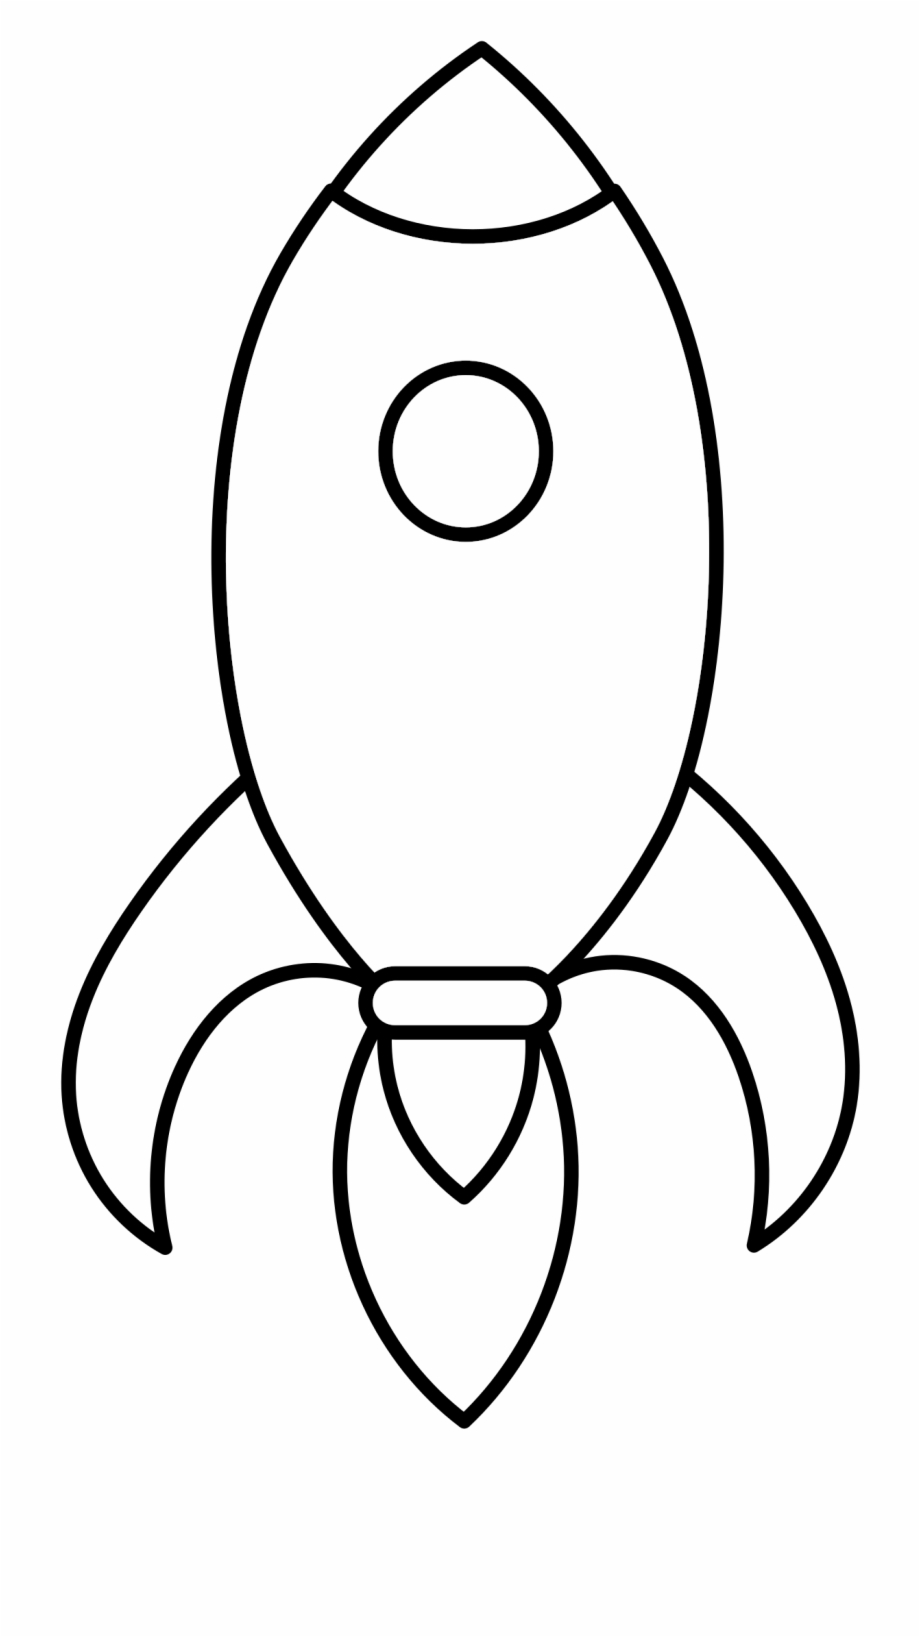 Rocket Ship Coloring Pages Space Drawing Images With